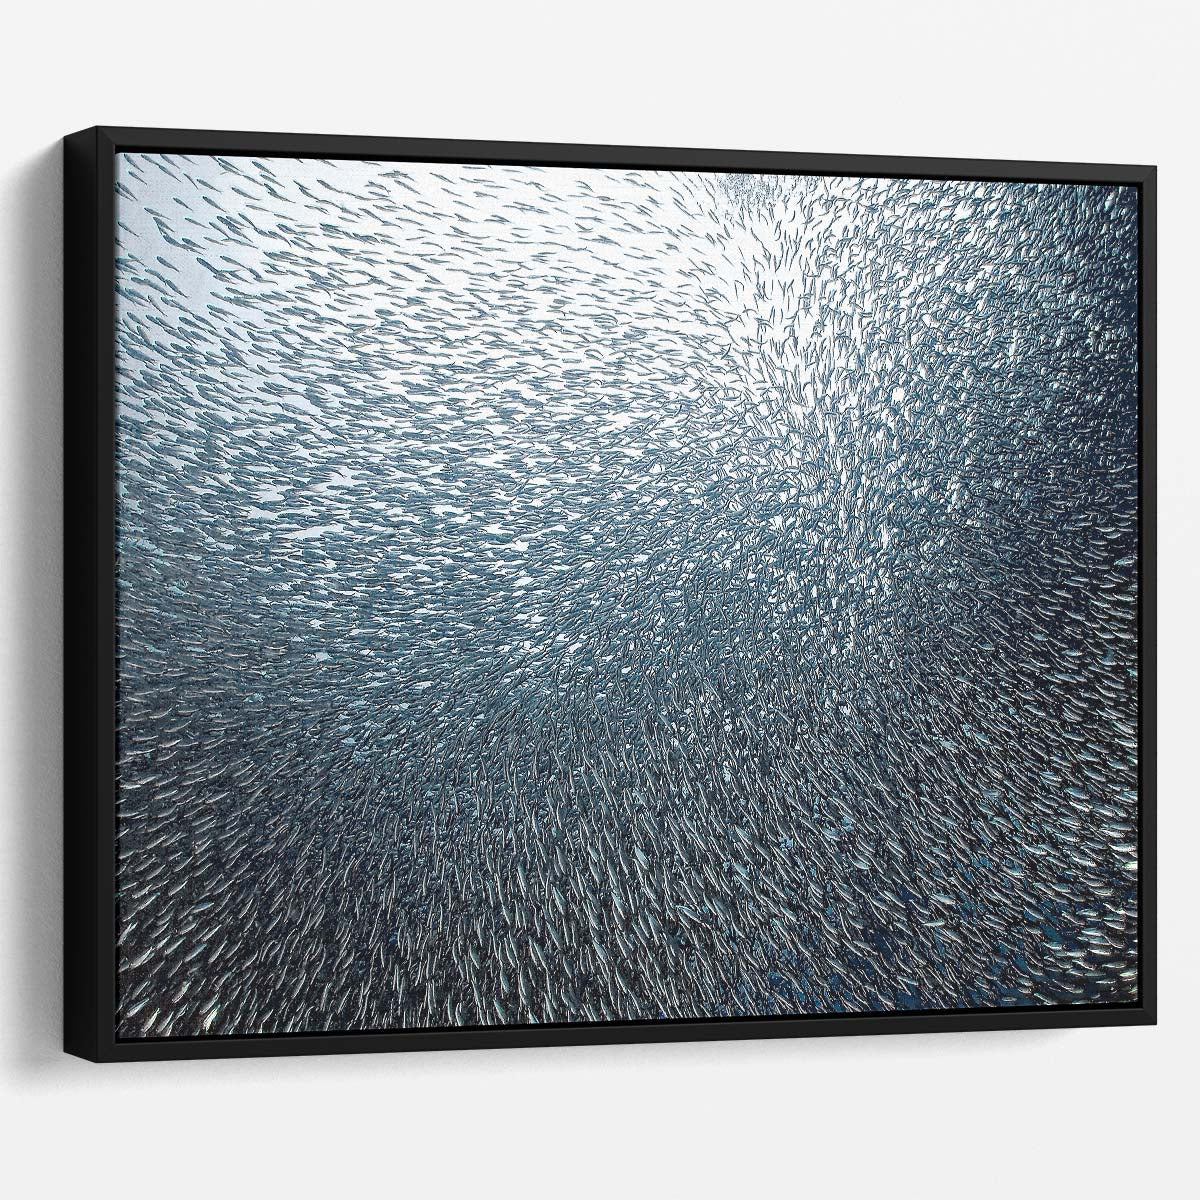 Moalboal Sardine Shoal Explosion Underwater Wall Art by Luxuriance Designs. Made in USA.